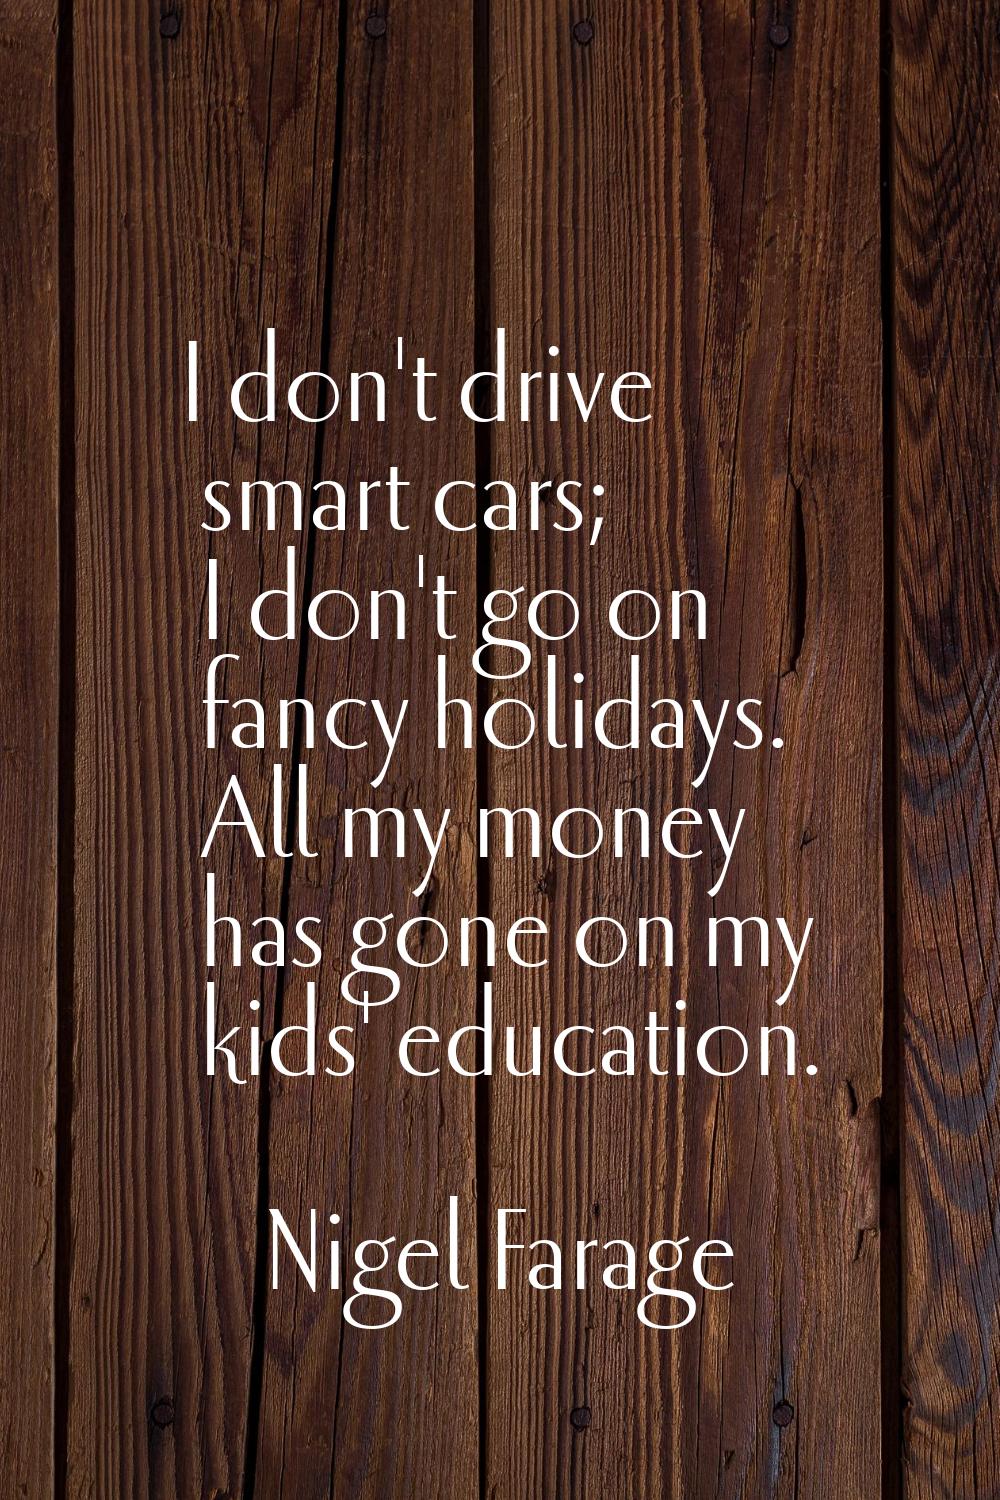 I don't drive smart cars; I don't go on fancy holidays. All my money has gone on my kids' education